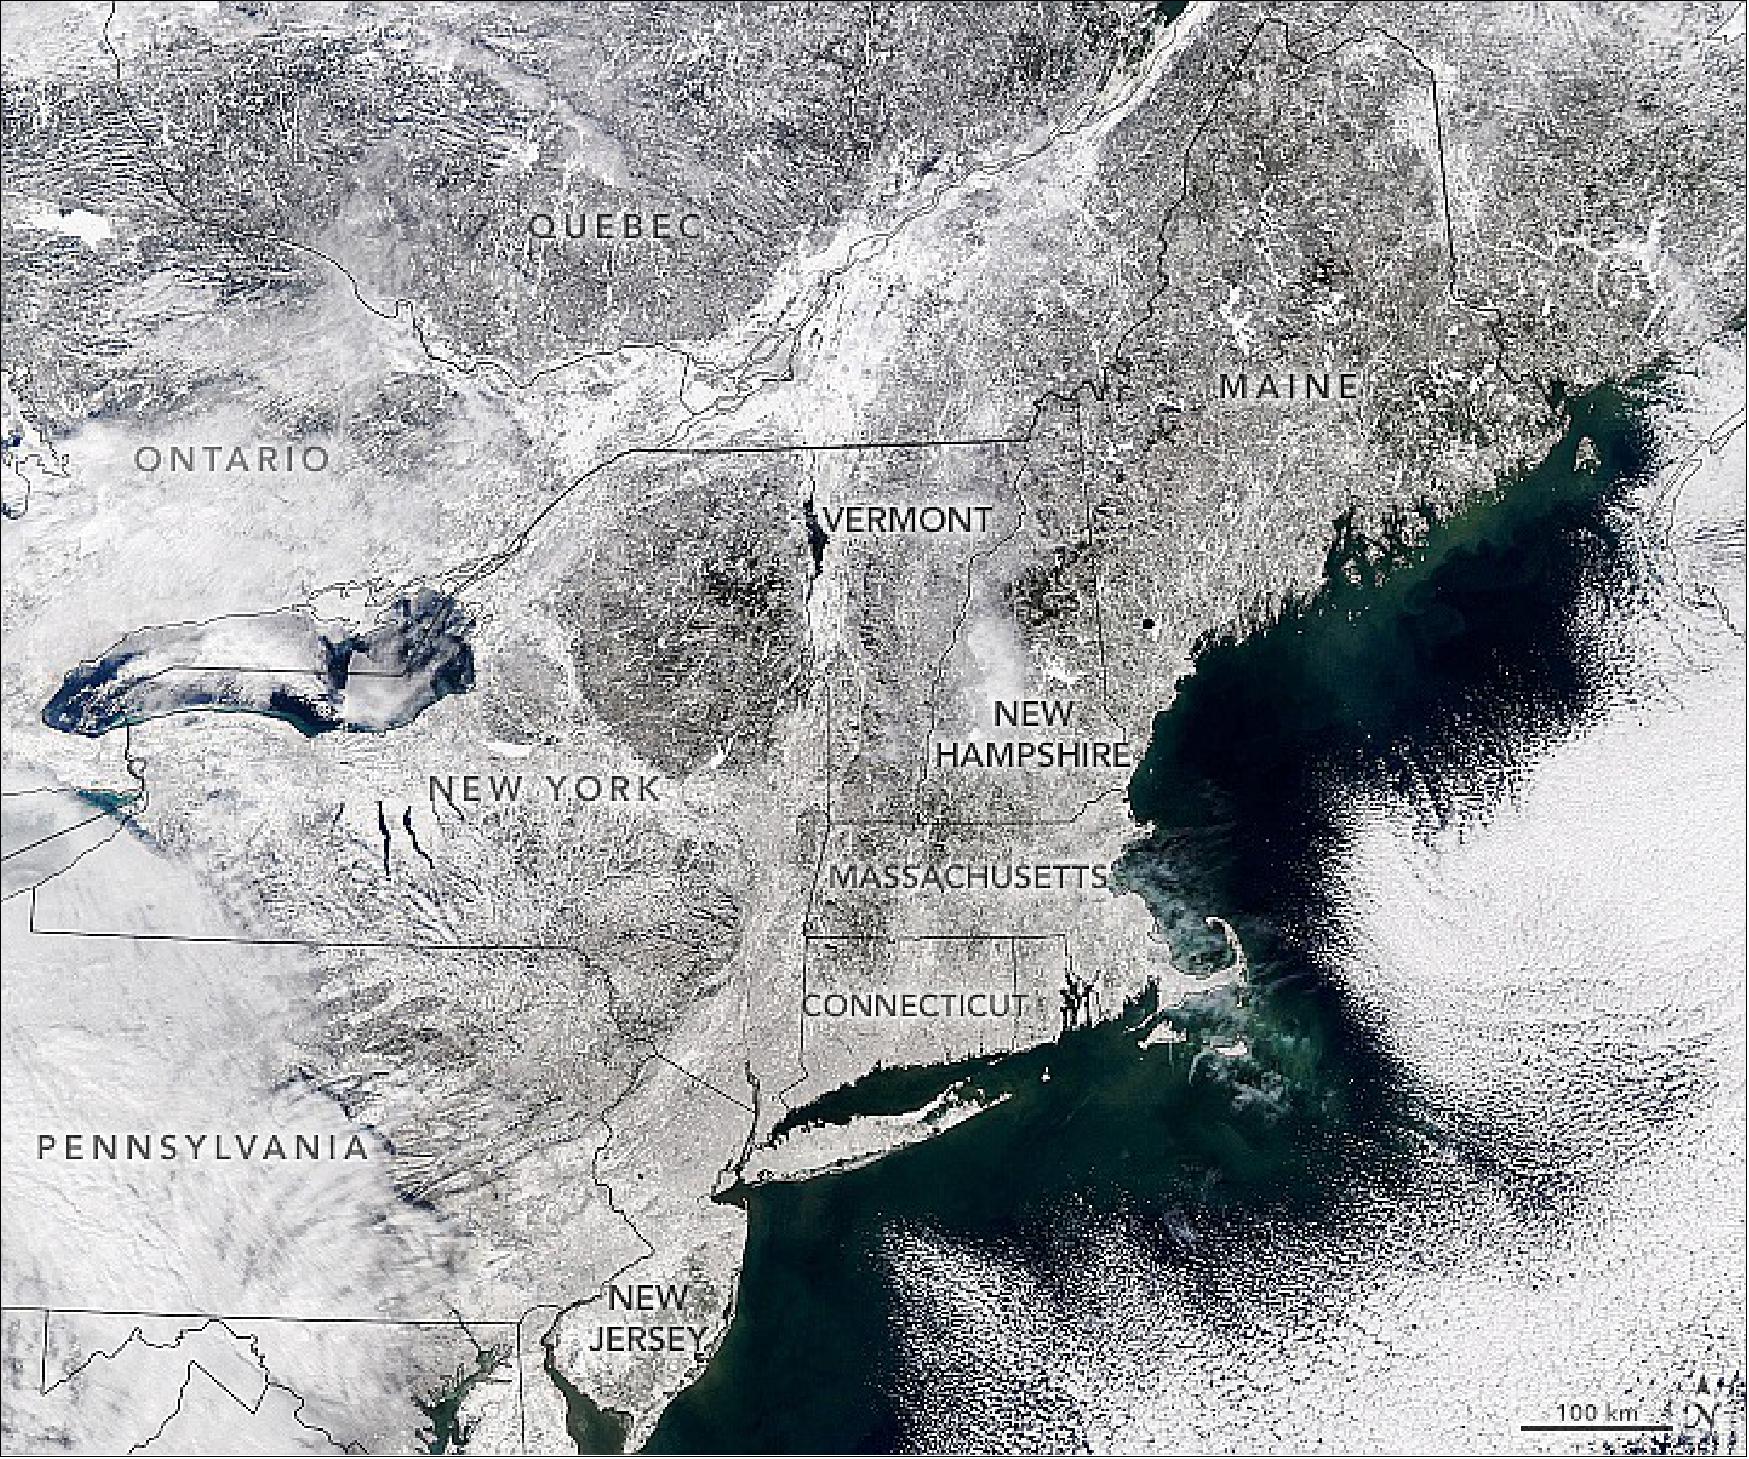 Figure 40: The combination of fierce winds and abundant snow forced the cancellation of nearly all airplane and train travel in the region. More than 100,000 people lost electricity during the storm, though nearly all had the lights back on by the morning of January 31. The MODIS instrument on NASA’s Aqua satellite acquired a natural-color view as people shoveled their way out on January 30, 2022 (image credit: NASA Earth Observatory image by Lauren Dauphin, using MODIS data from NASA EOSDIS LANCE and GIBS/Worldview. Photograph by Adrian Loftus, NASA GSFC. Story by Michael Carlowicz with Sofie Bates, NASA Earth Science News Team)